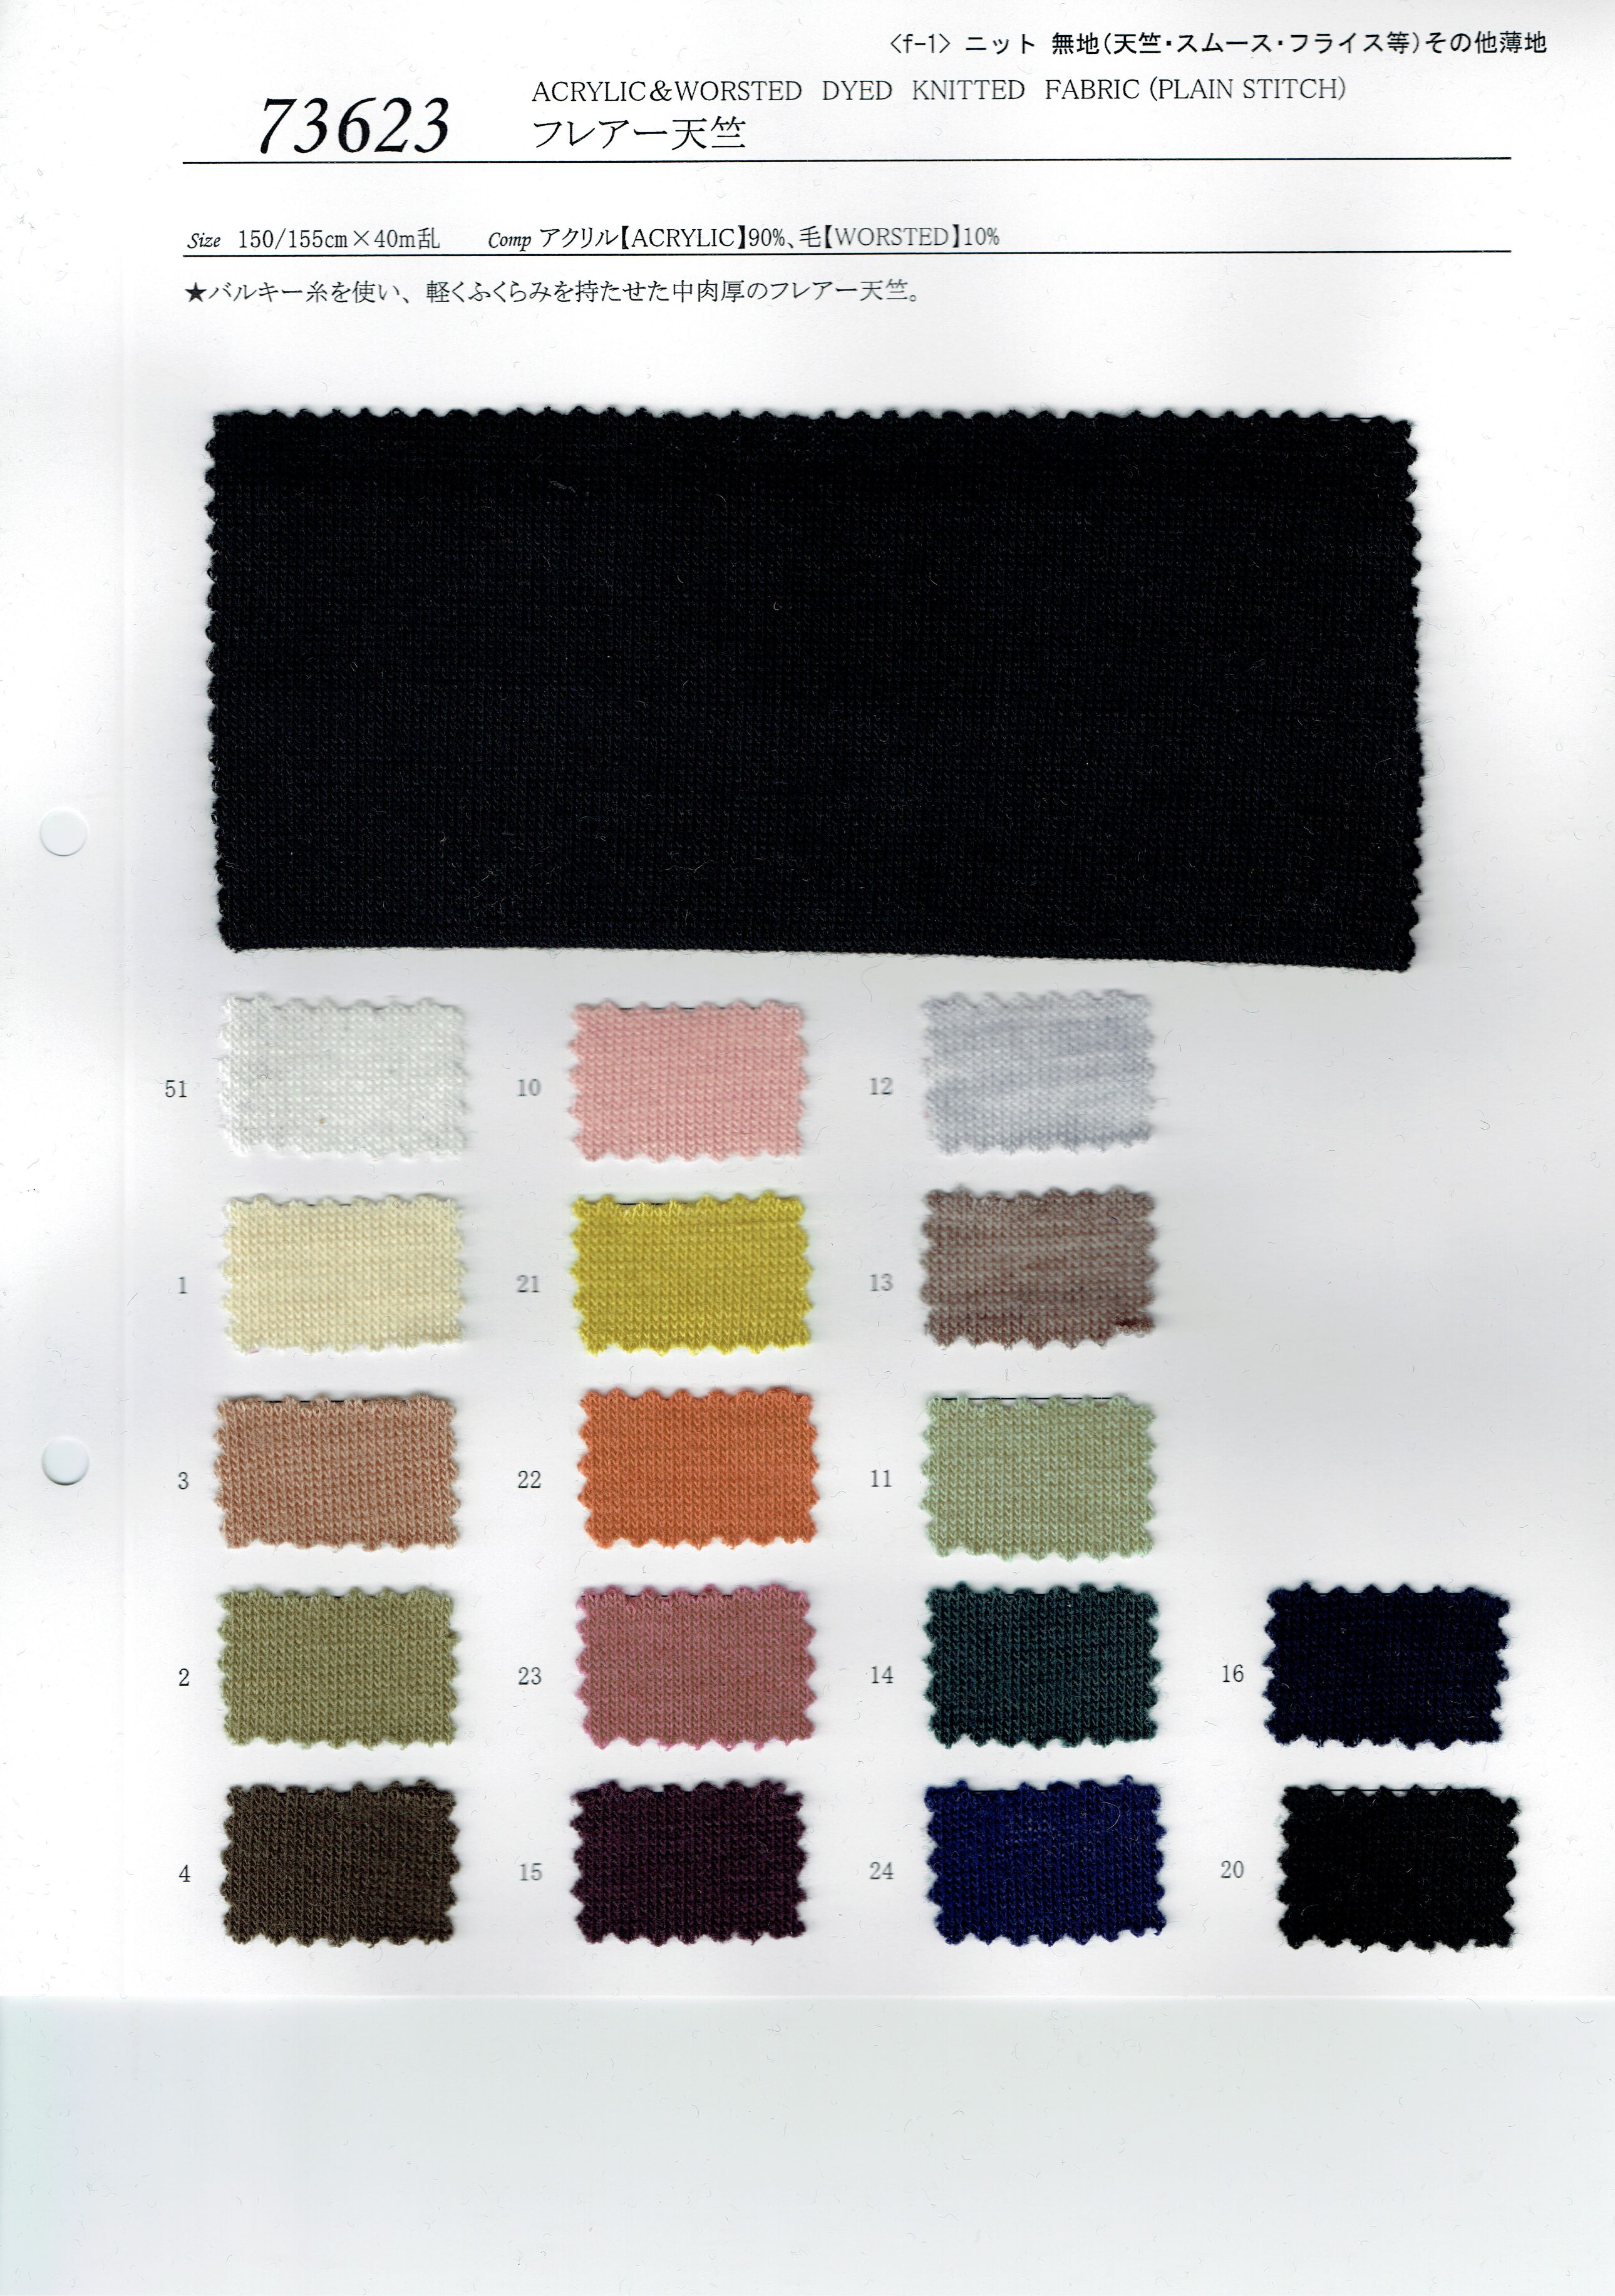 View ACRYLIC90/WOOL10ACRYLIC&WORSTED DYED KNITTED FABRIC [PLAIN STITCH]ACRYLIC&WORSTED DYED KNITTED FABRIC [PLAIN STITCH]